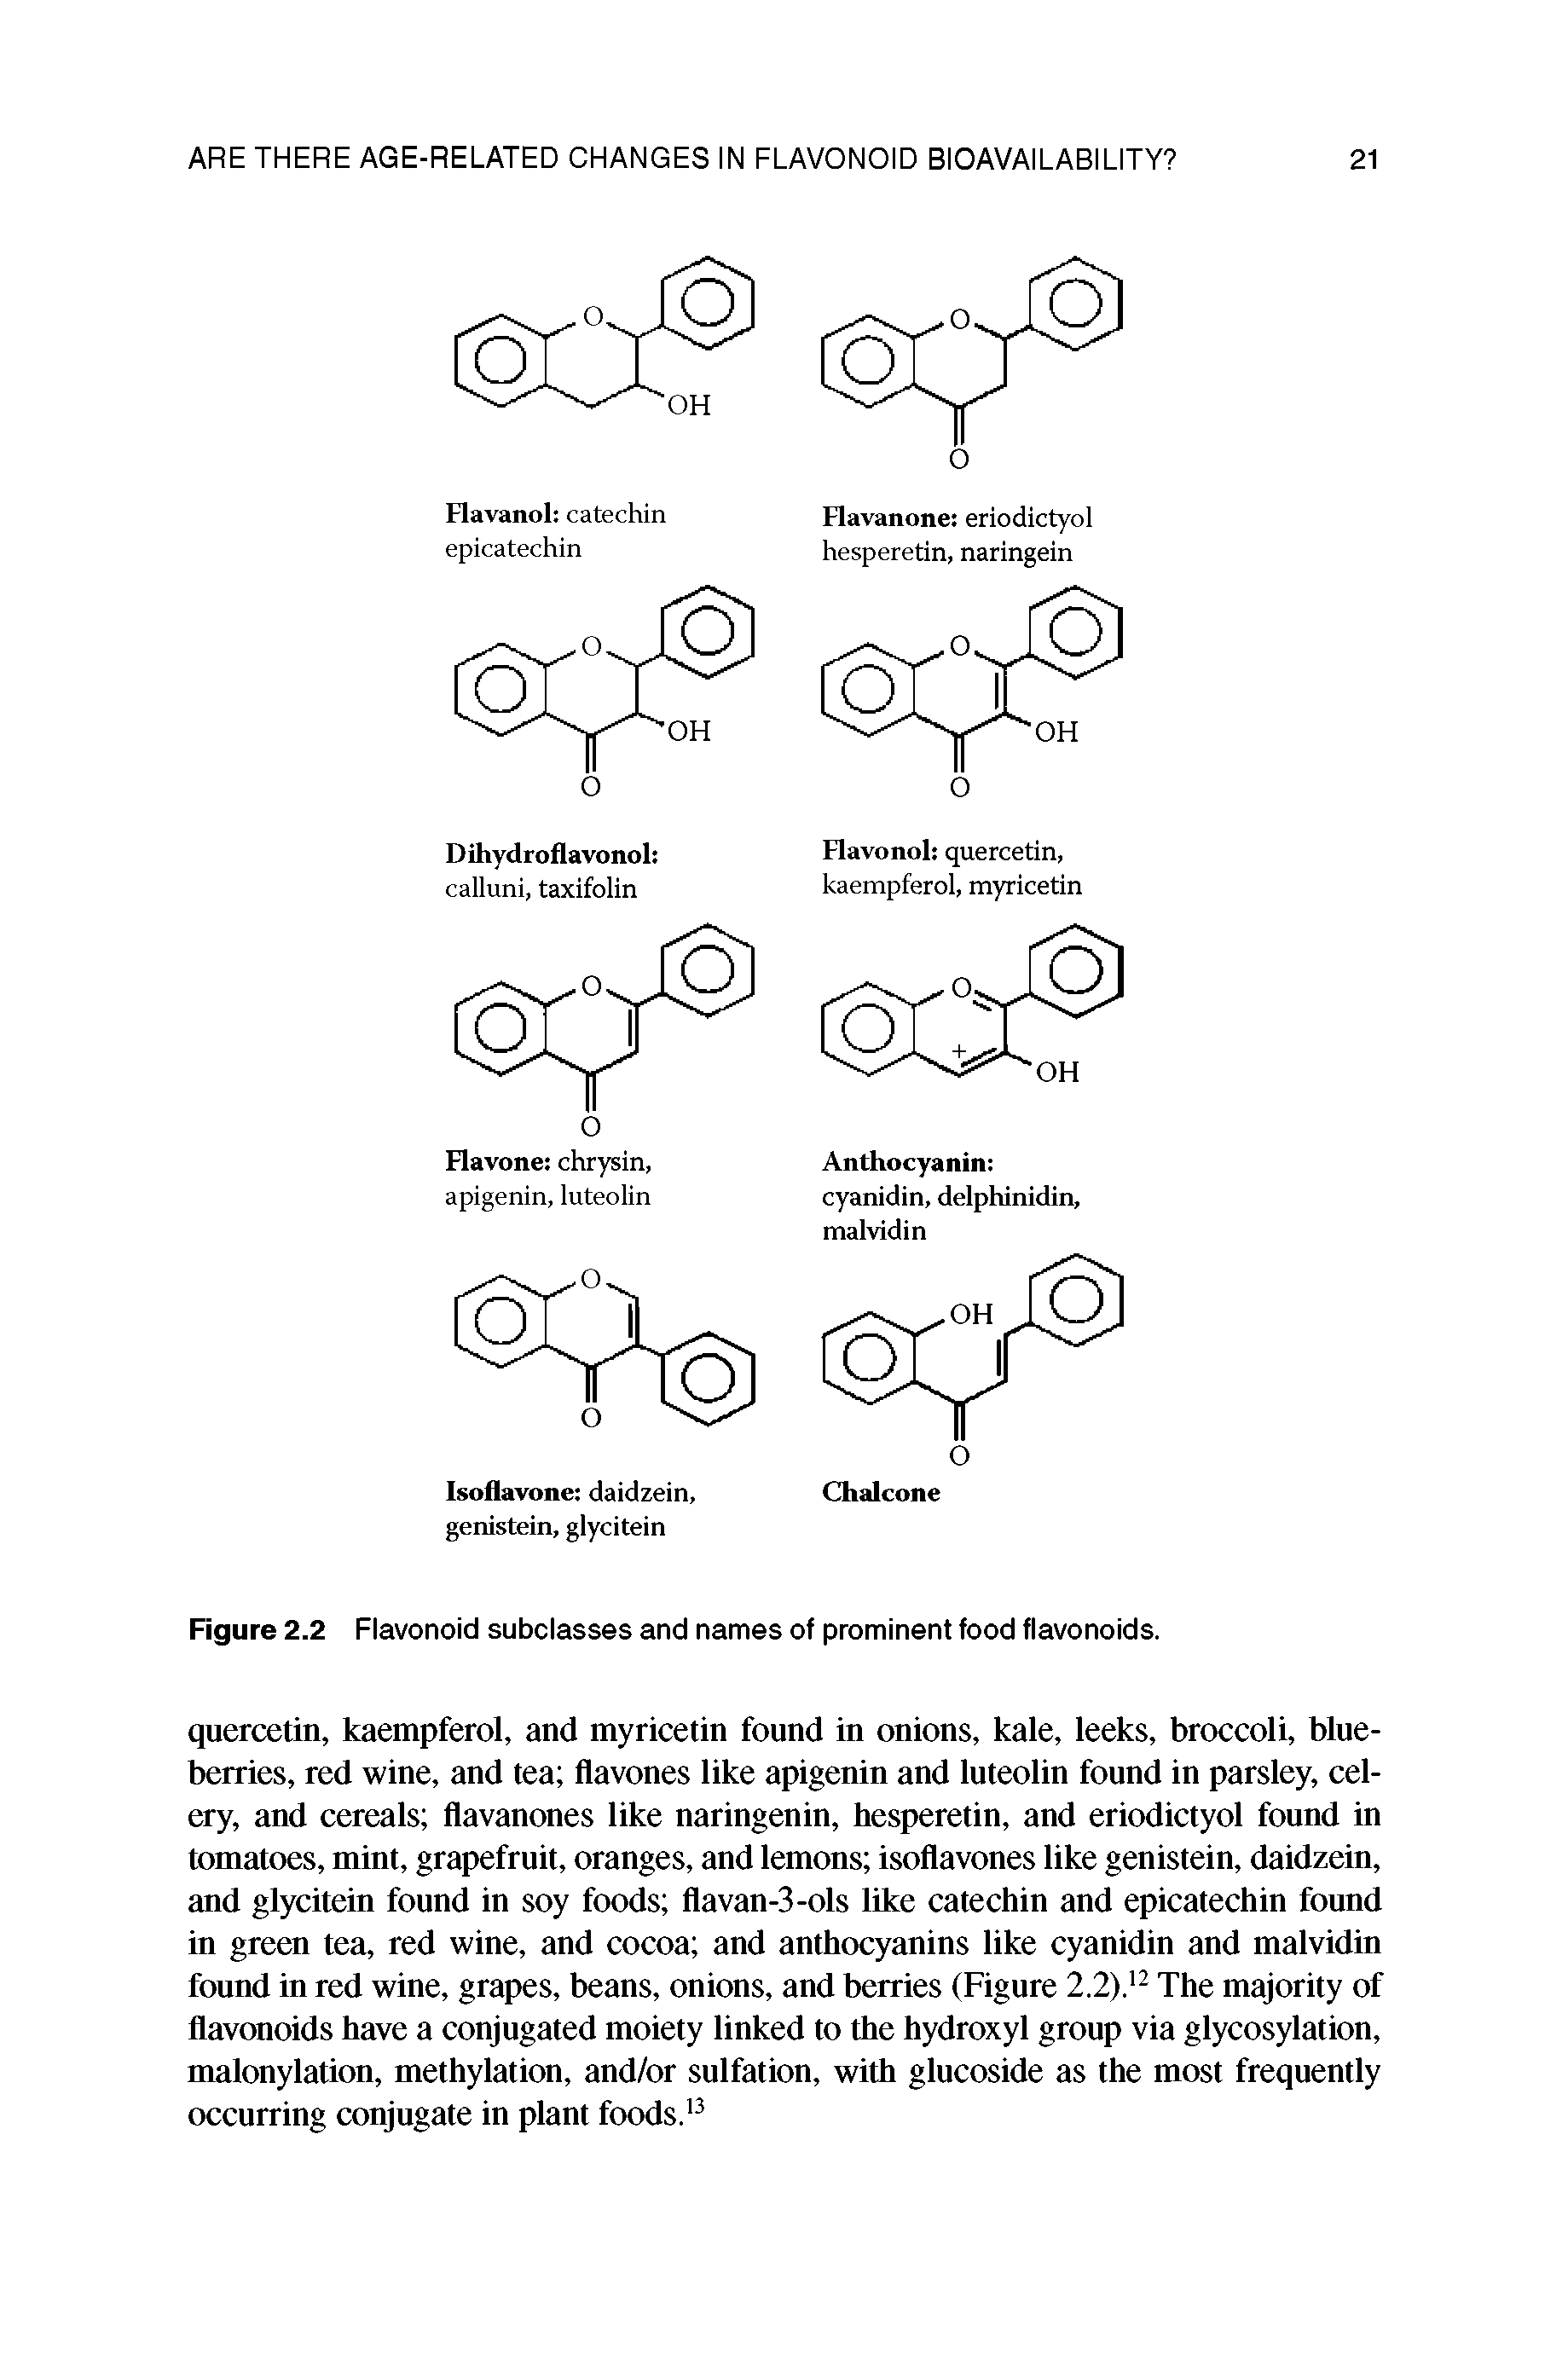 Figure 2.2 Flavonoid subclasses and names of prominent food flavonoids.